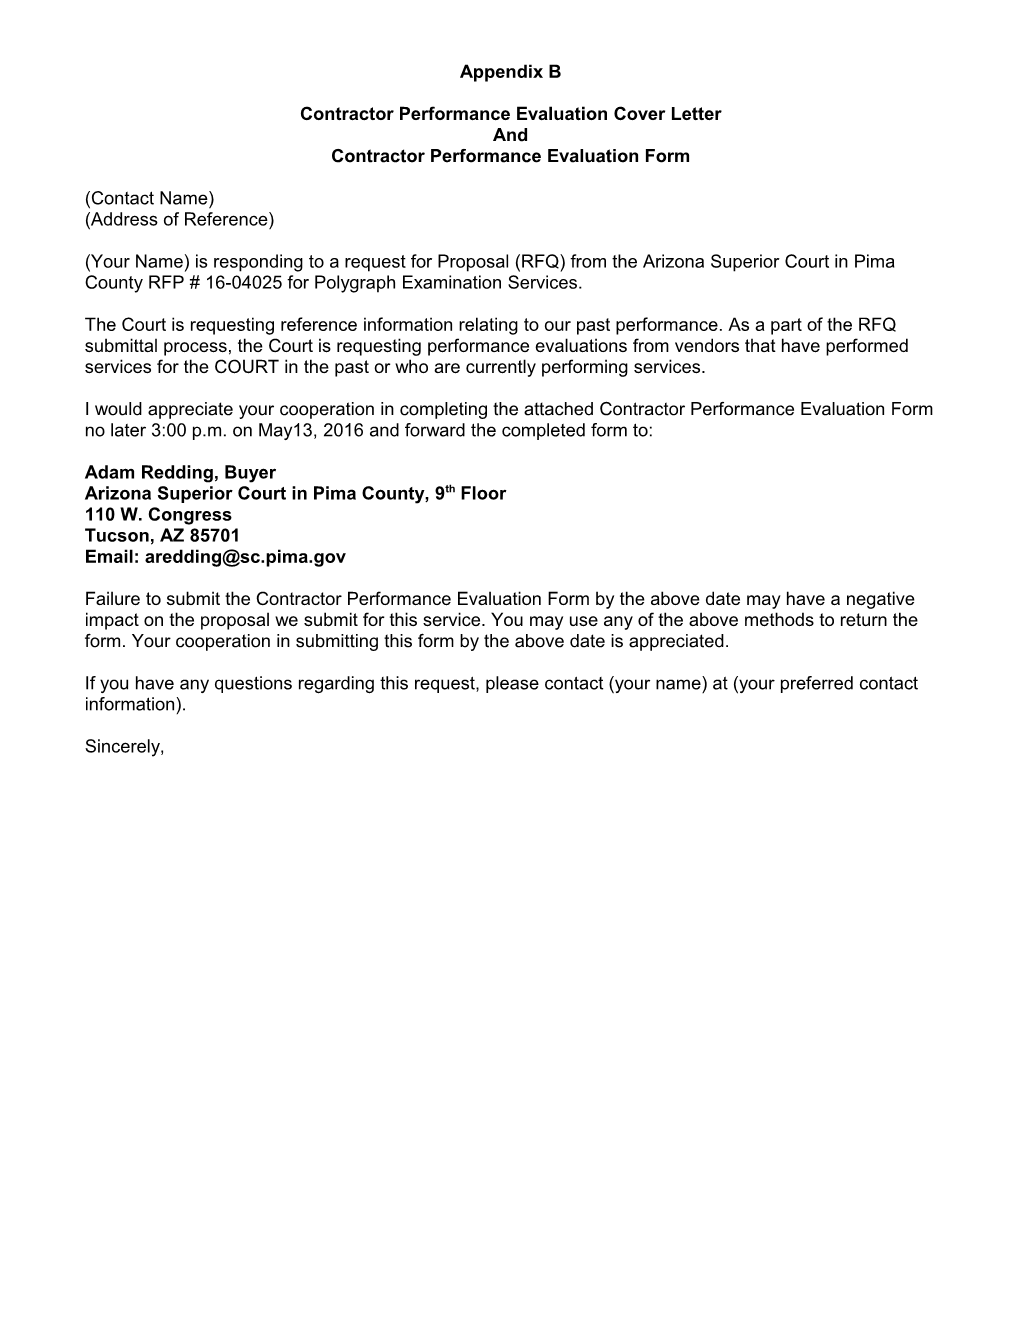 Contractor Performance Evaluation Cover Letter